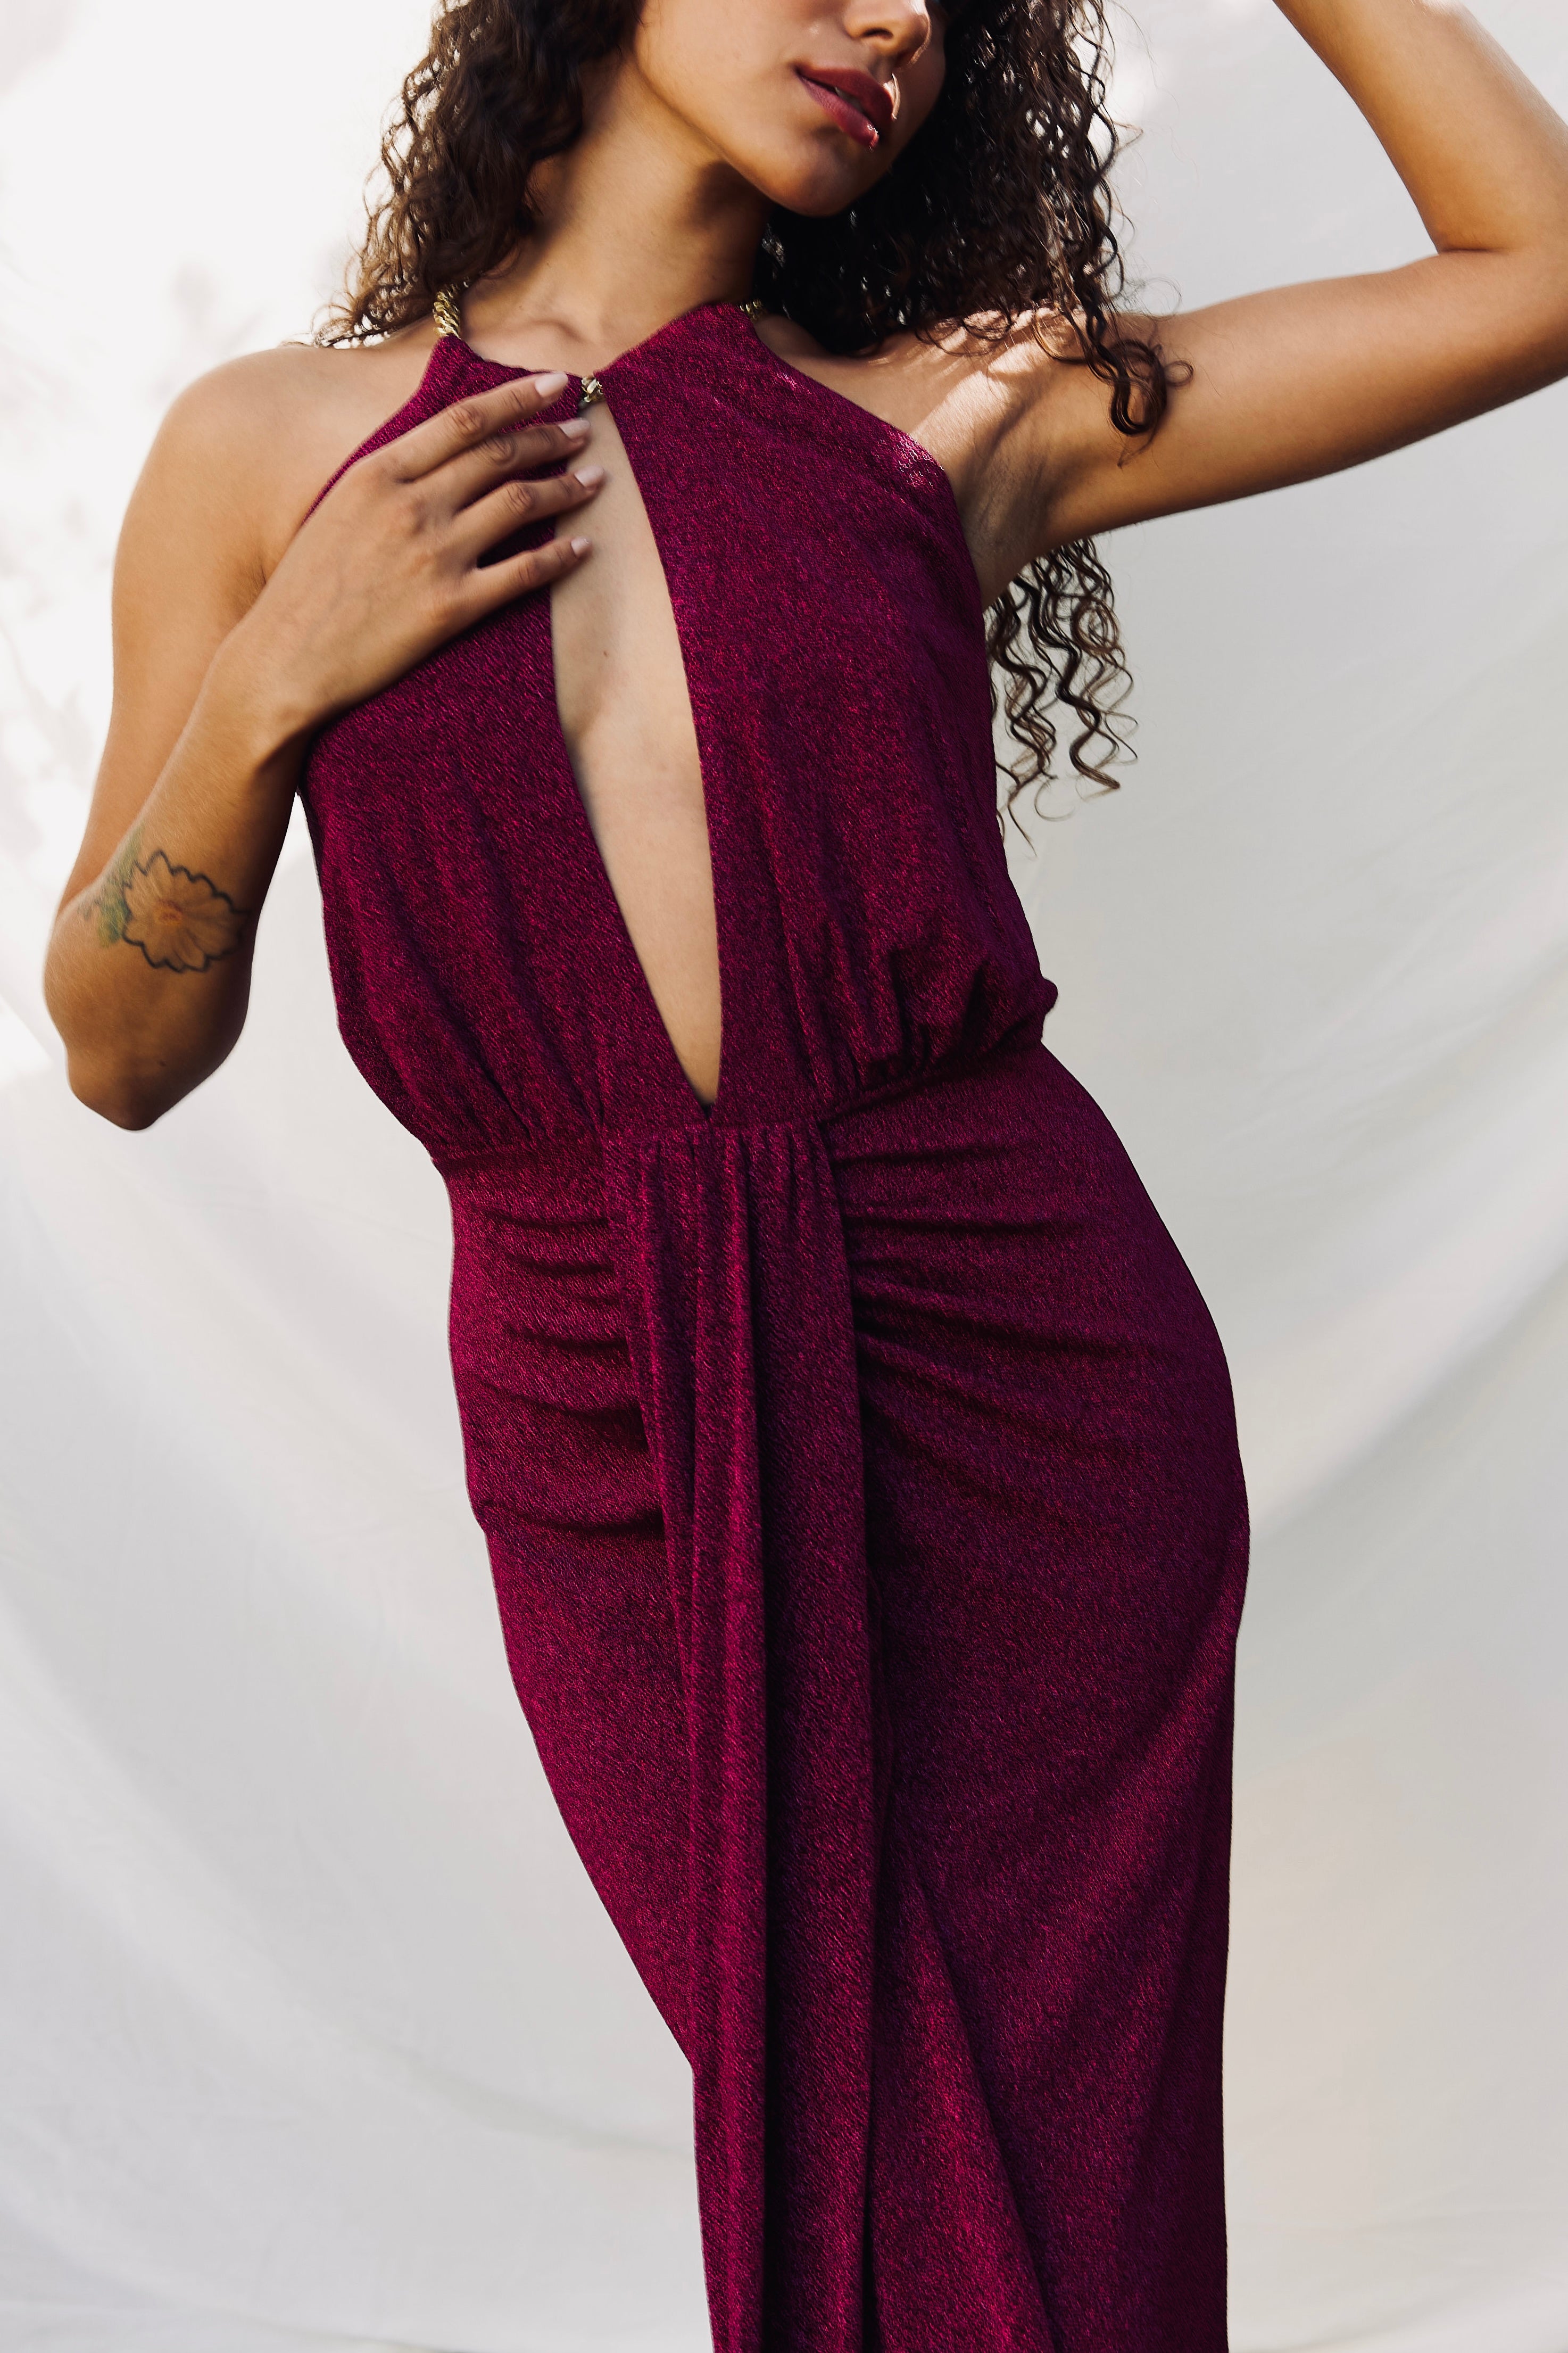 SHIMMERY HALTER NECK DRESS WITH CHAINS IN PURPLE